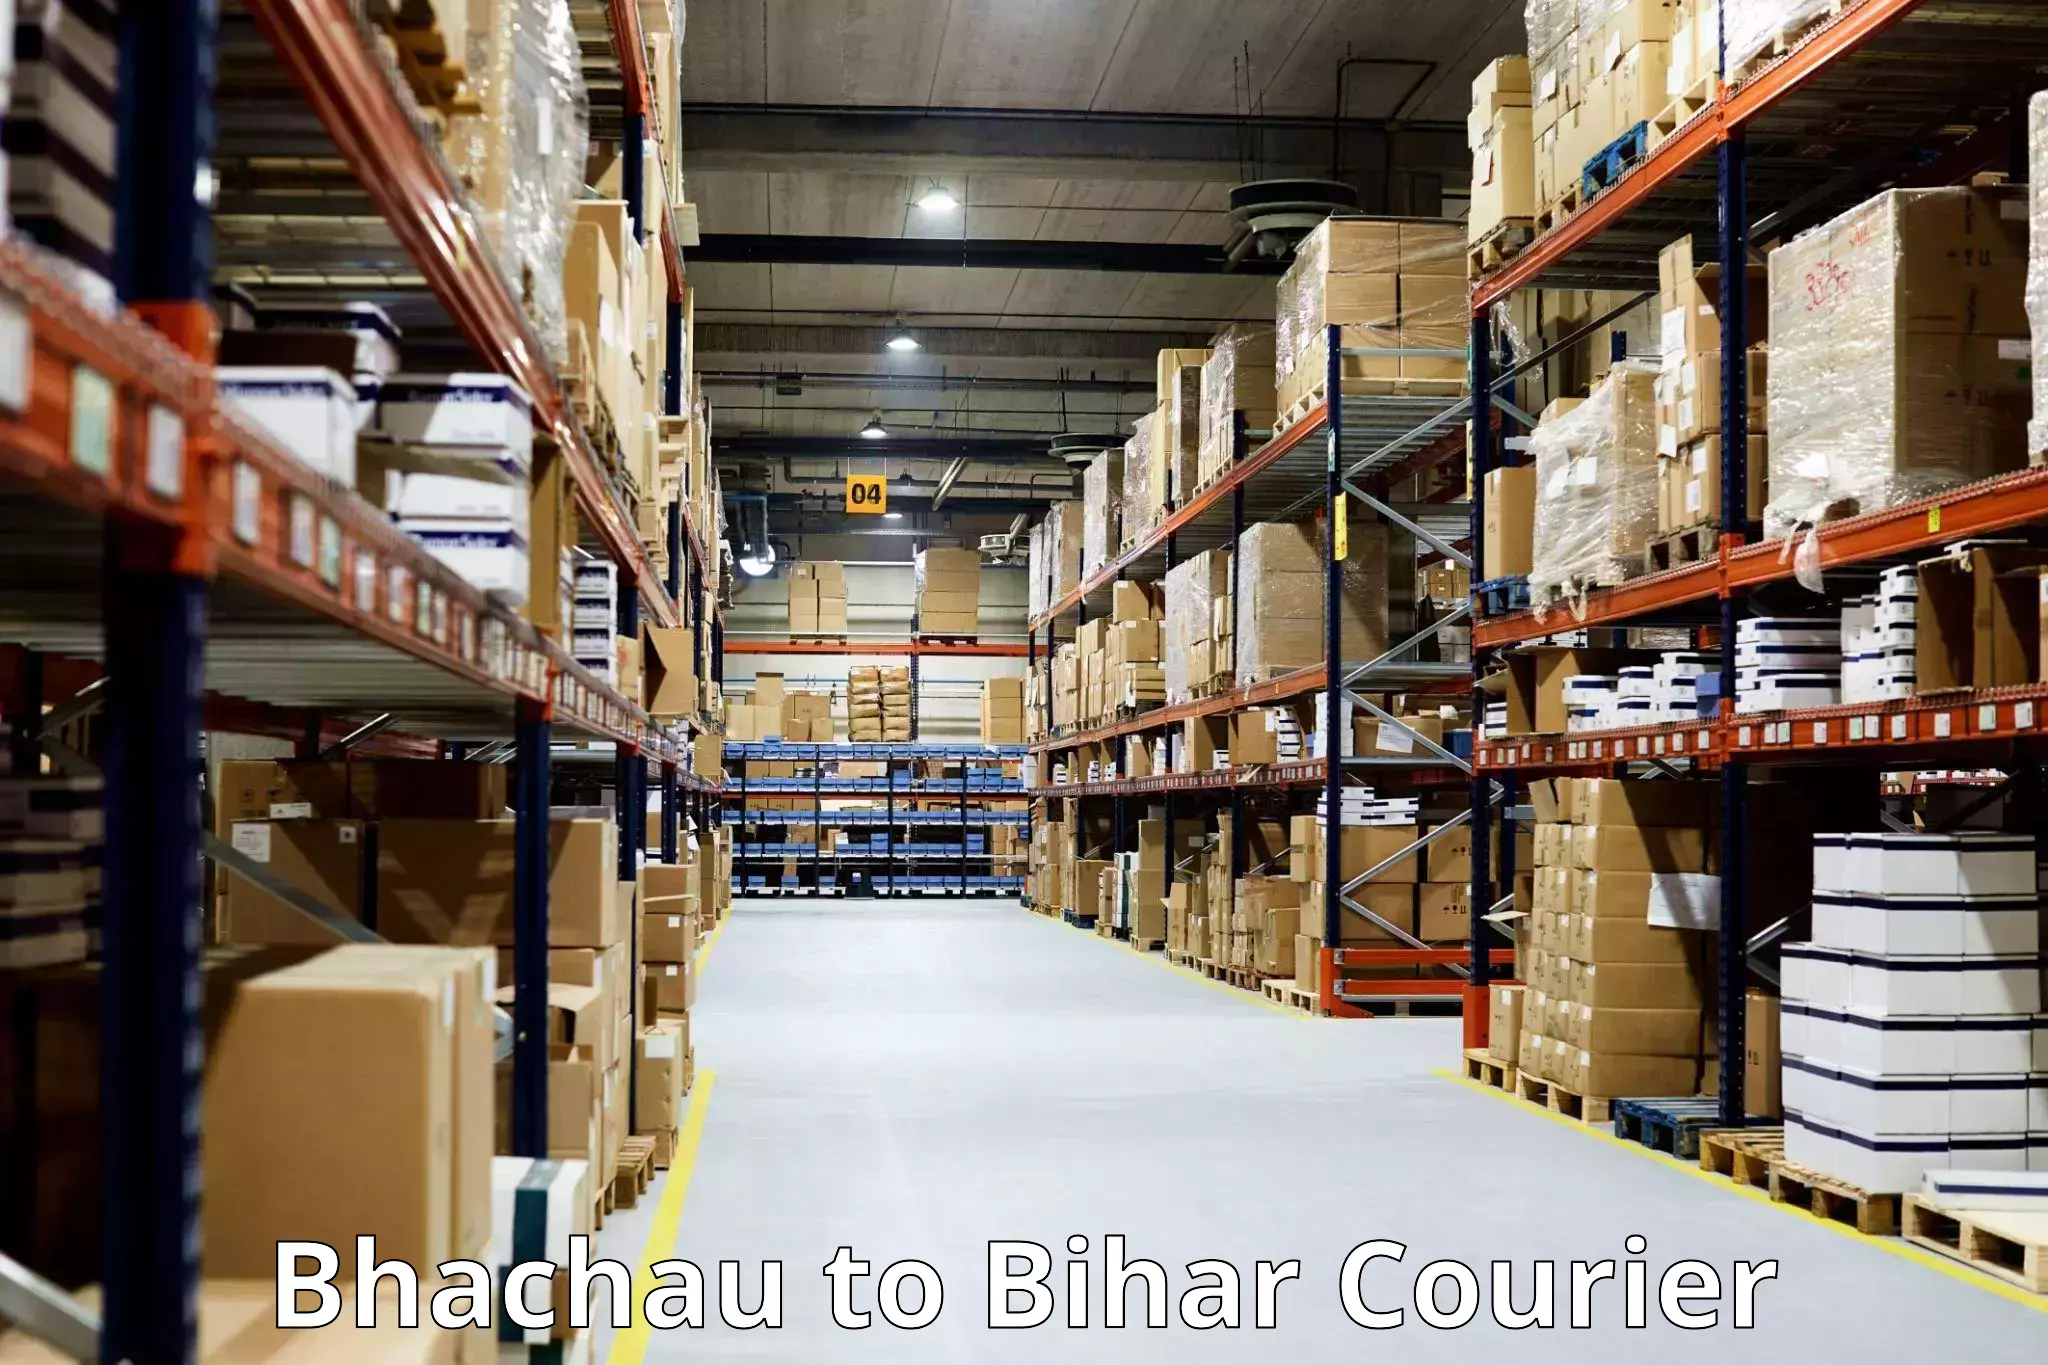 Instant baggage transport quote Bhachau to Dhaka